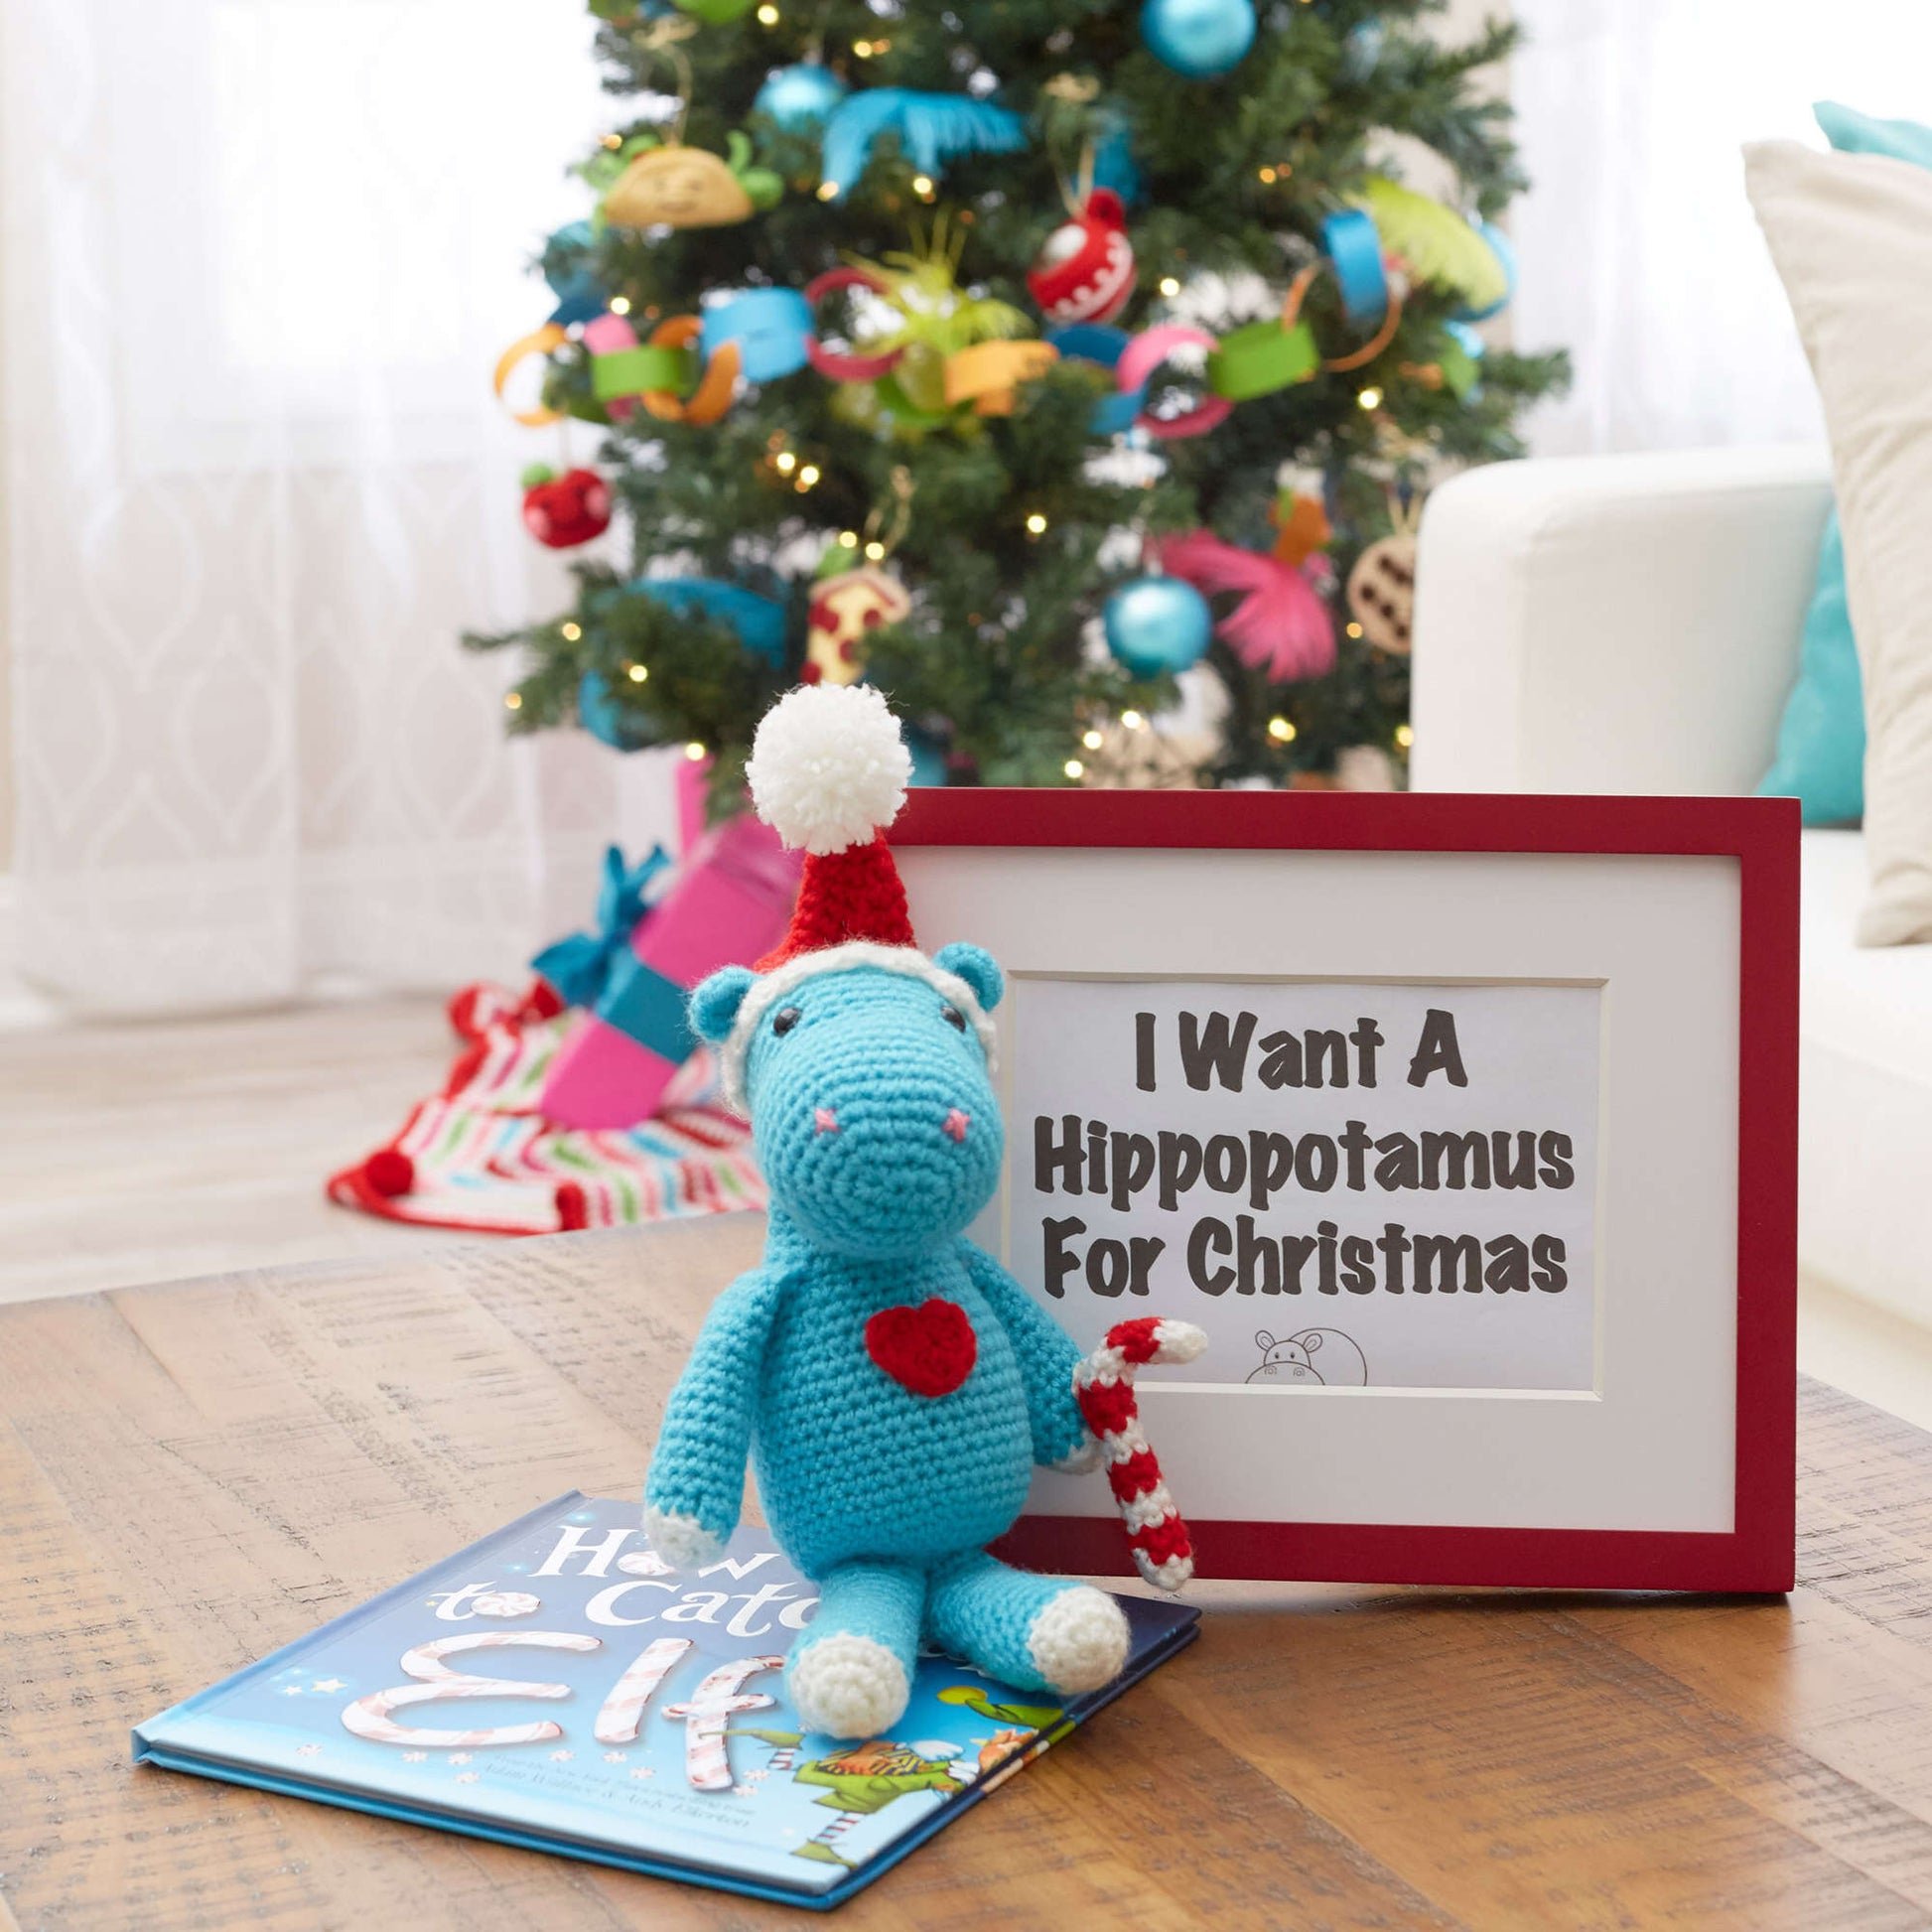 Free Red Heart I Want A Hippopotamus For Christmas Crochet Pattern